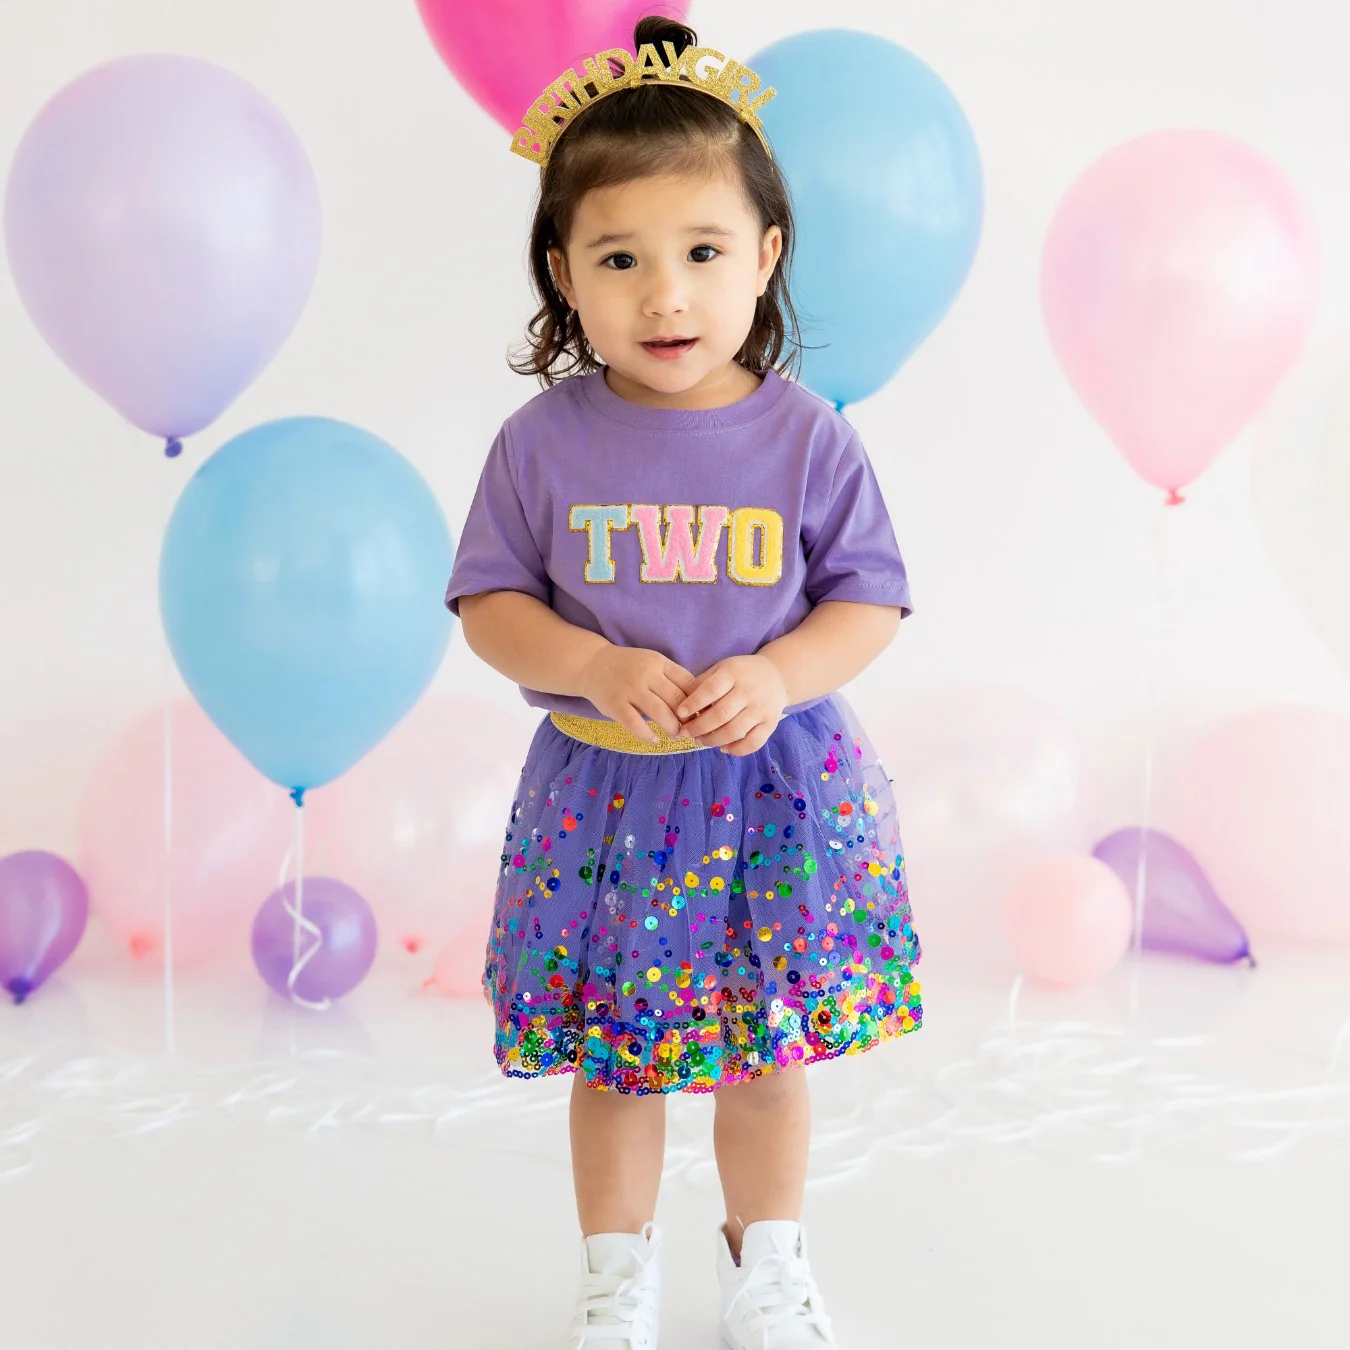 Sweet Wink Second Birthday Patch Short Sleeve T-Shirt Lavender